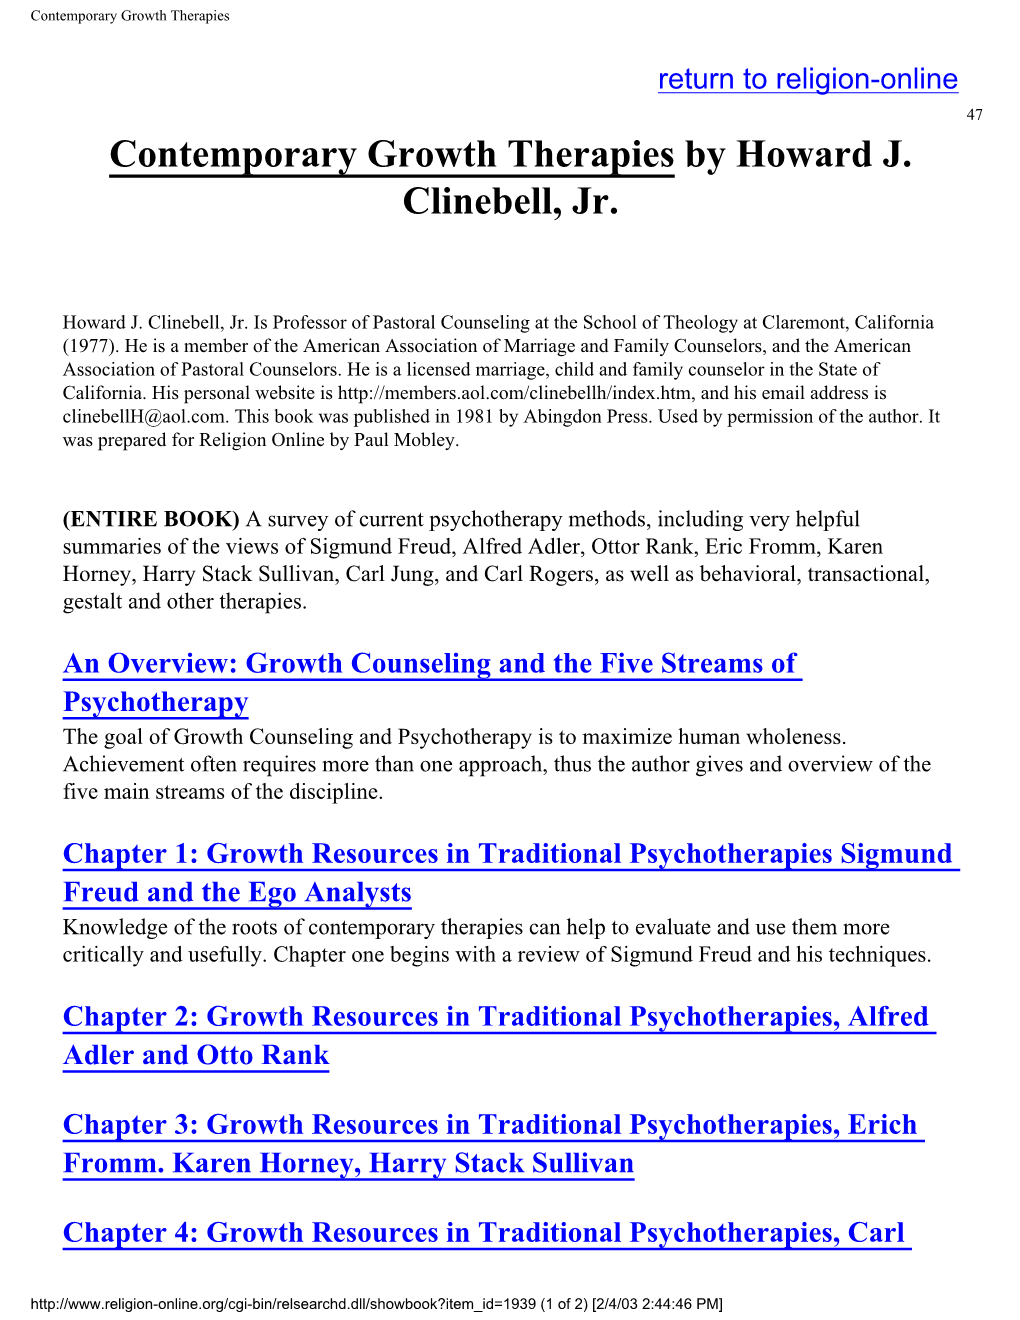 Contemporary Growth Therapies by Howard J. Clinebell, Jr